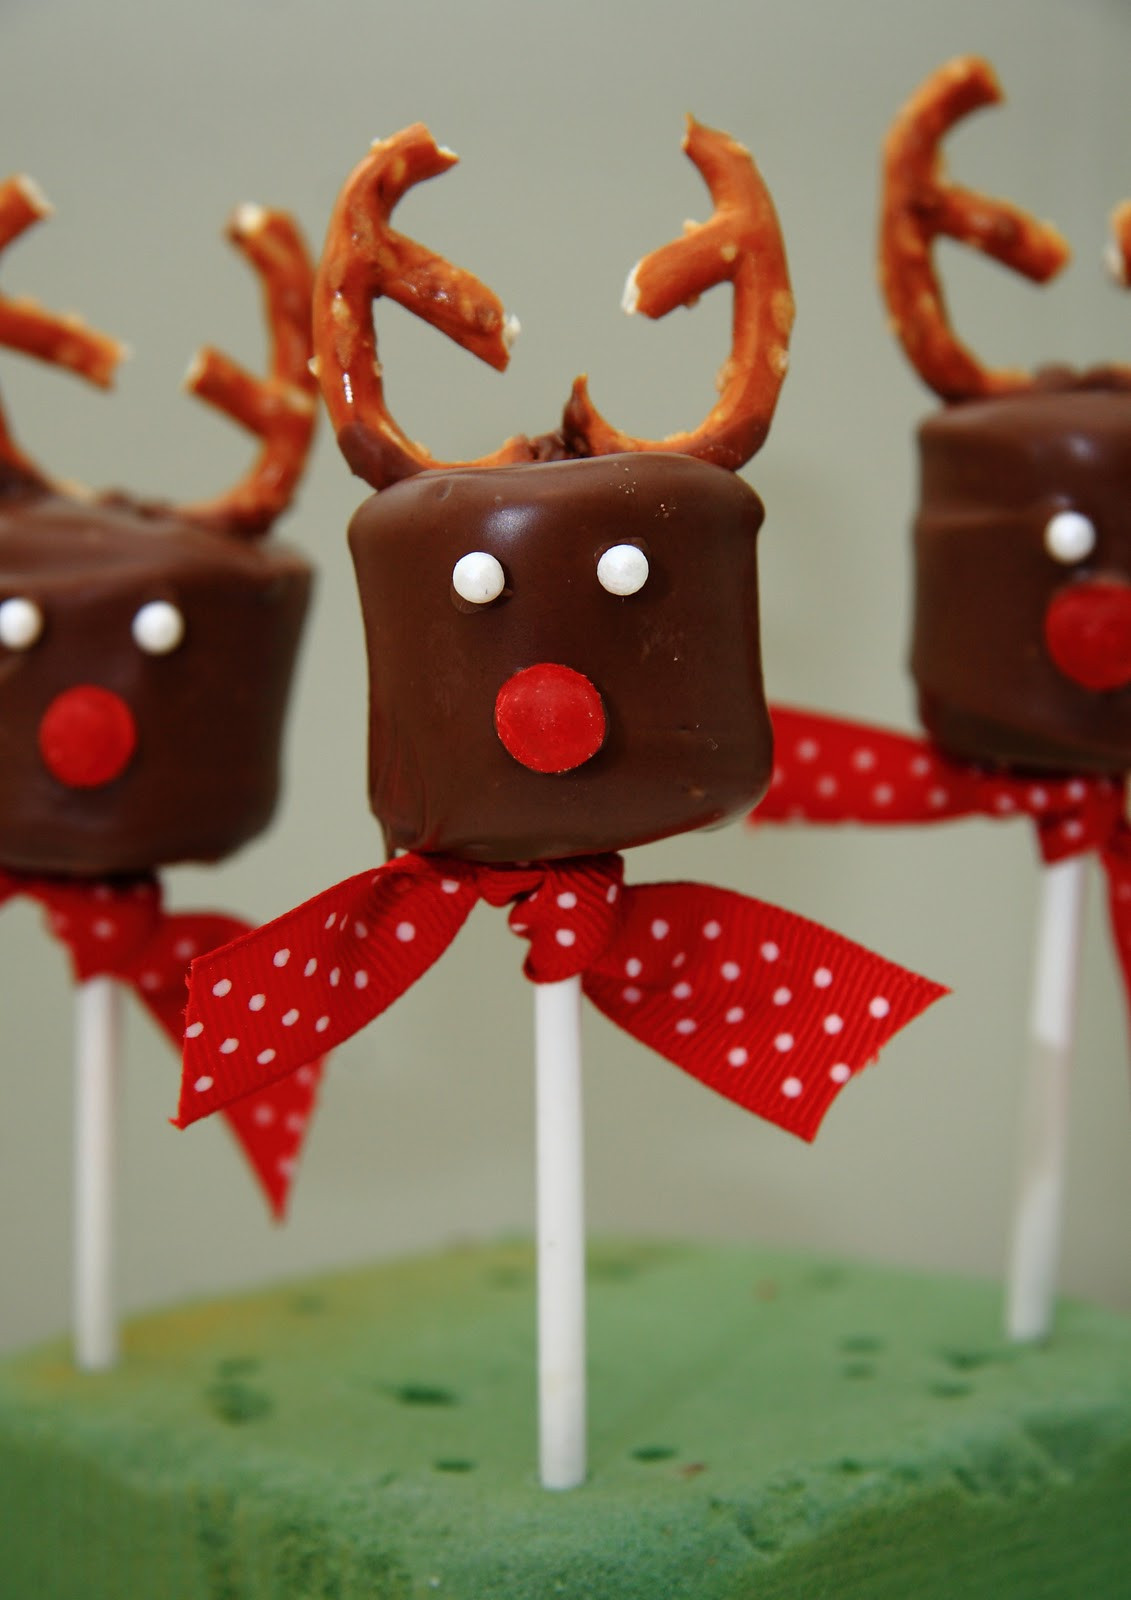 Youth Christmas Party Ideas
 21 Amazing Christmas Party Ideas for Kids